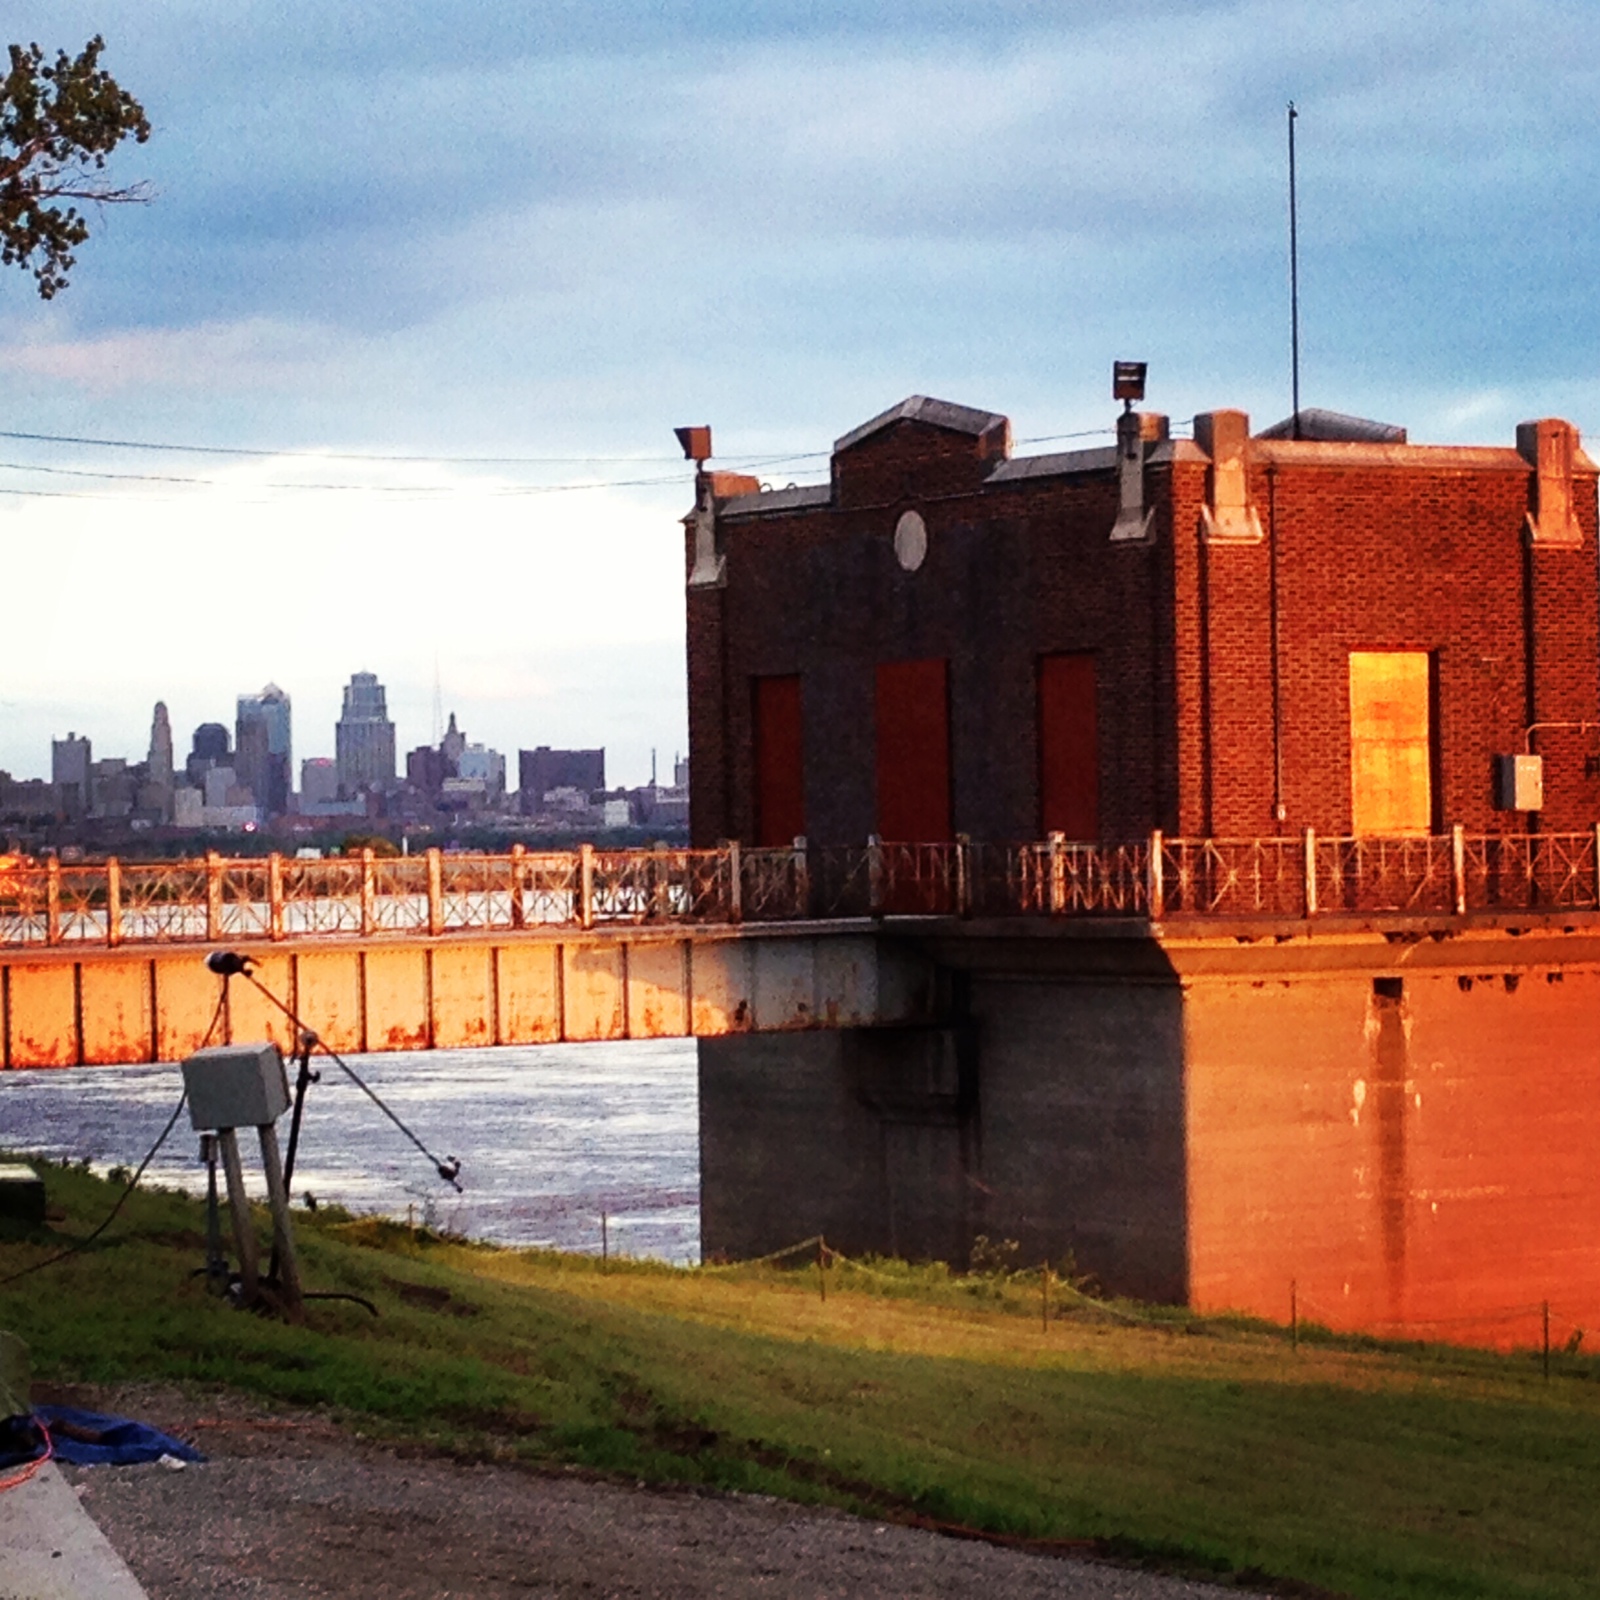 The view of Kansas City, Missouri's skyline and the river from the KCMO Water Services Department Pumphouse. Photo taken during Bridging the Gap's 20th Anniversary Party.